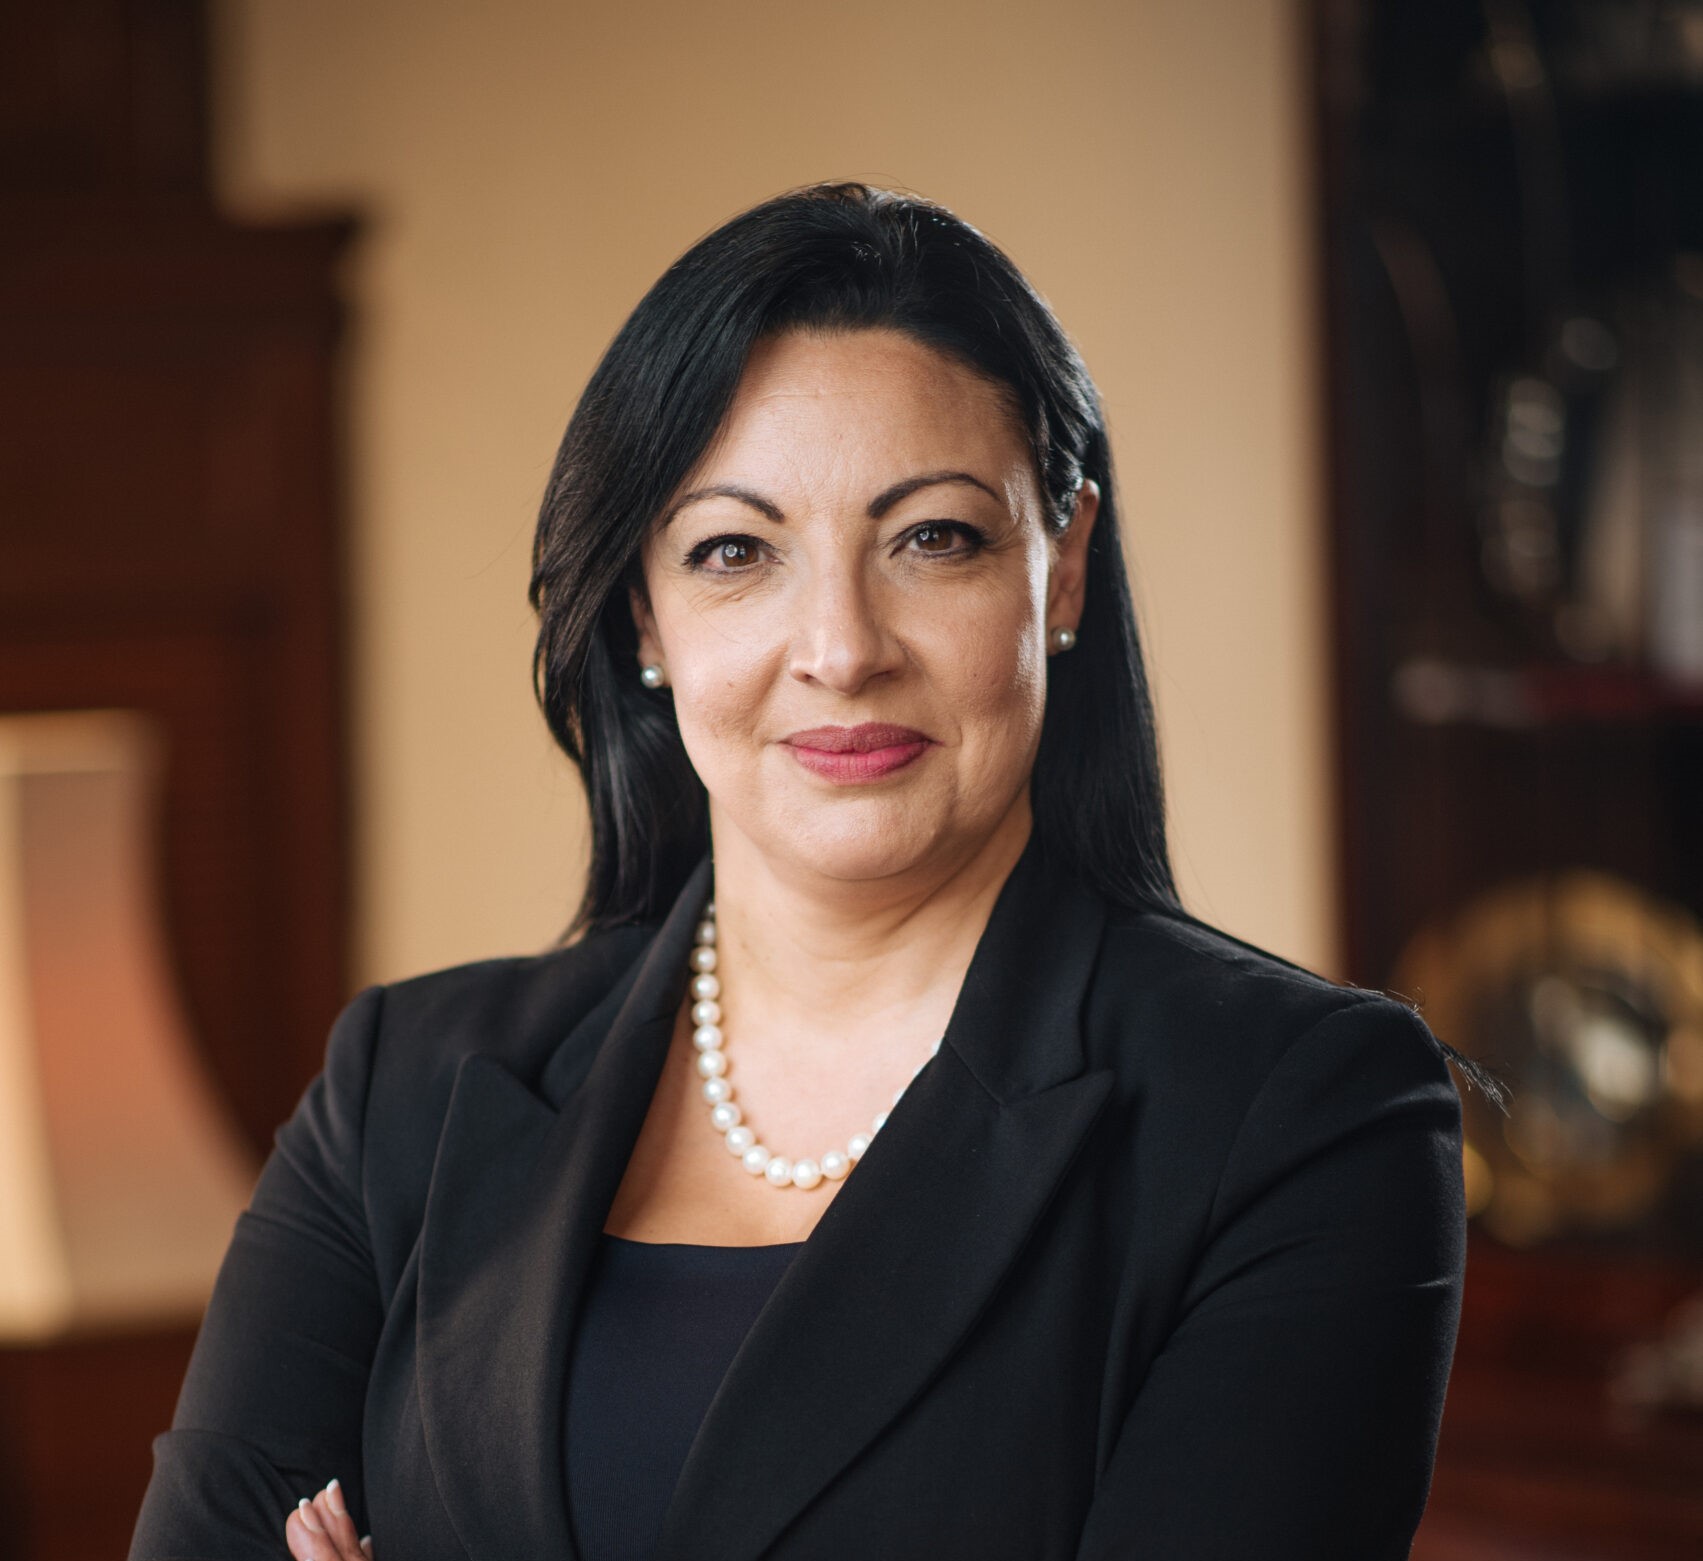 Malta Chamber appoints new CEO